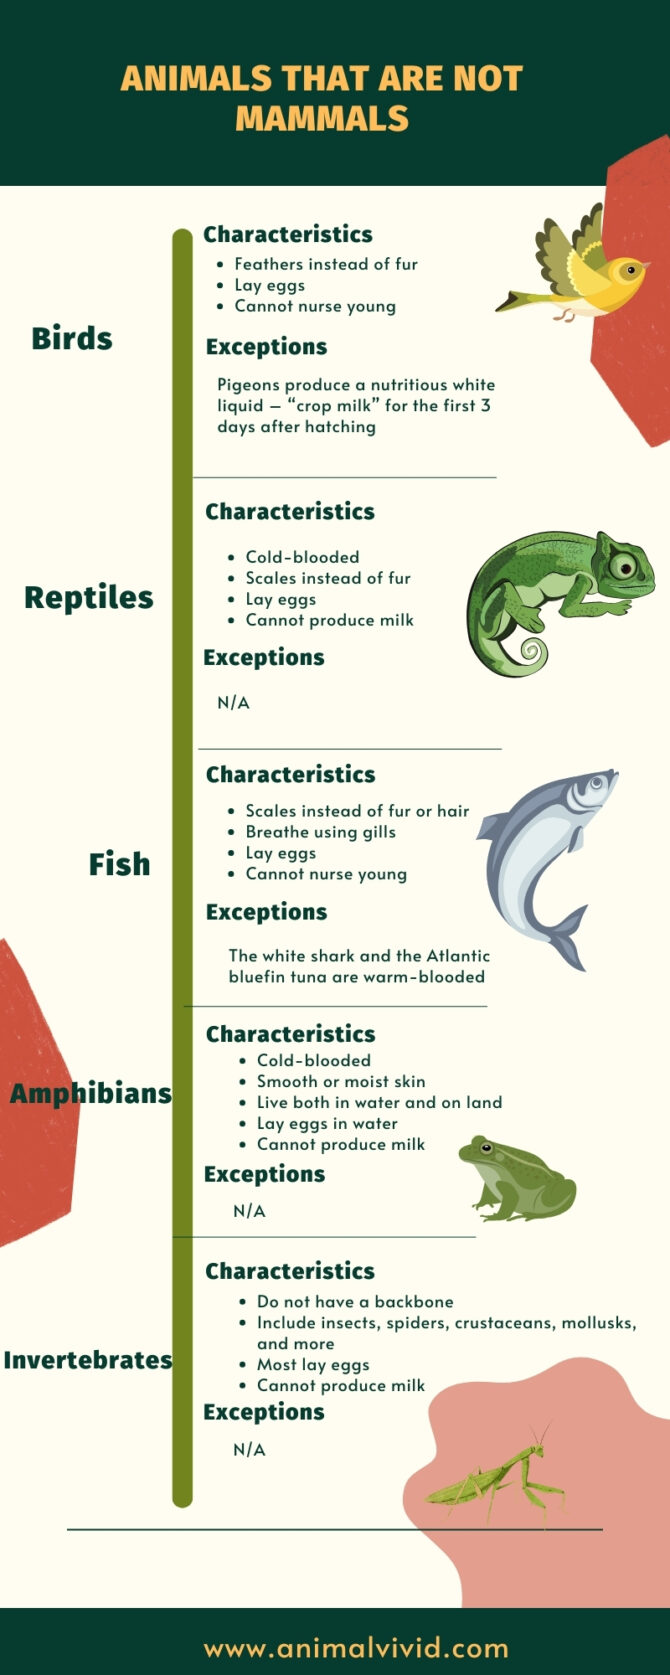 Animals That Are Not Mammals infographic